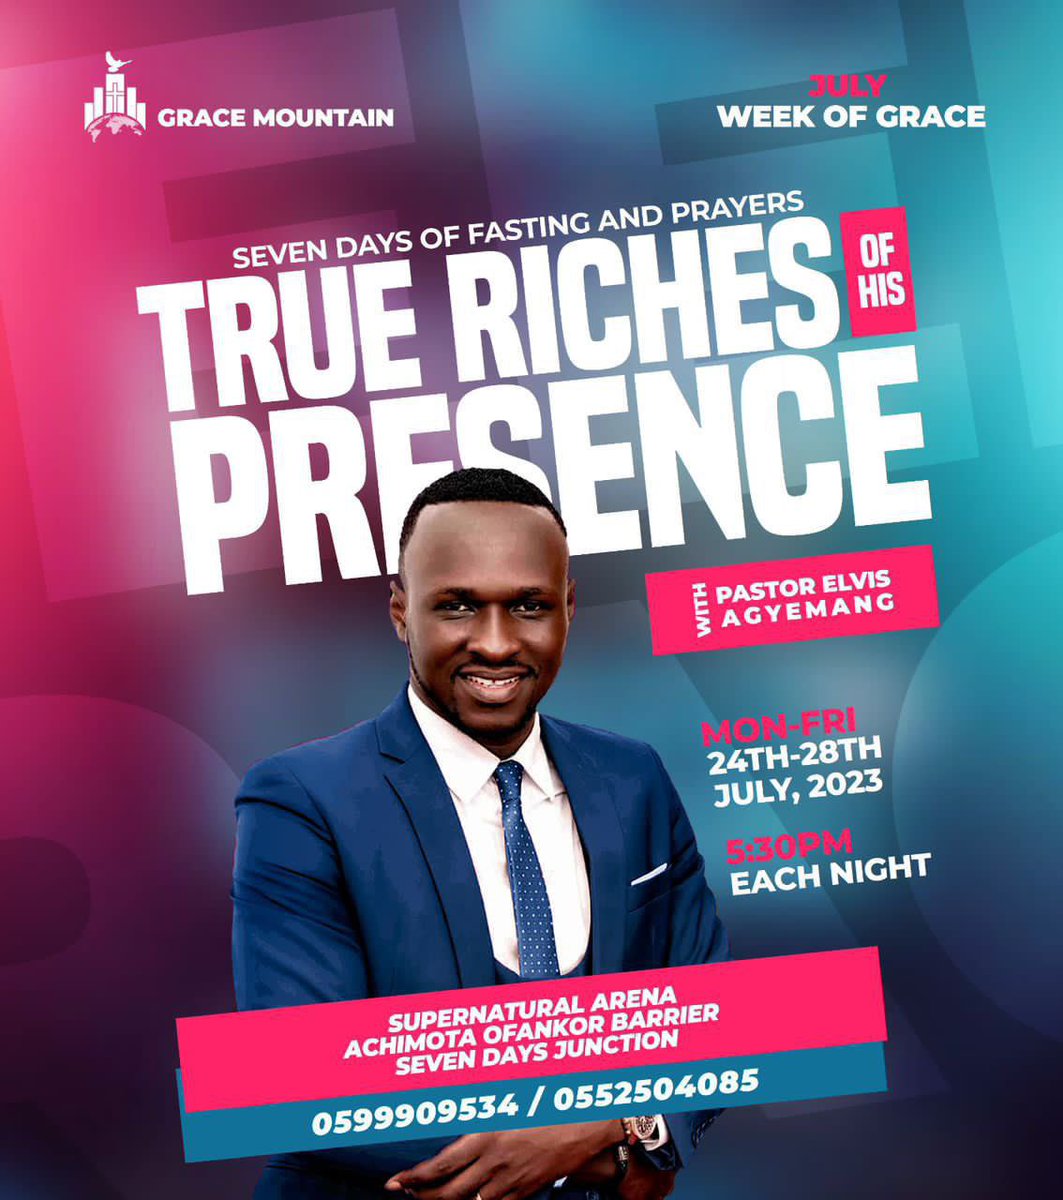 Don’t miss out tonight’s service at 5:30pm prompt . God is turning us back to Himself!

July Week Of Grace || The Riches Of His Presence 

#AlphaHour #AlphaHourWithPastorElvis #PastorElvis #GenesisTV #LadyMercyAgyemangElvis  #HisPresence #GraceMountainMinistry #WeekOfGrace